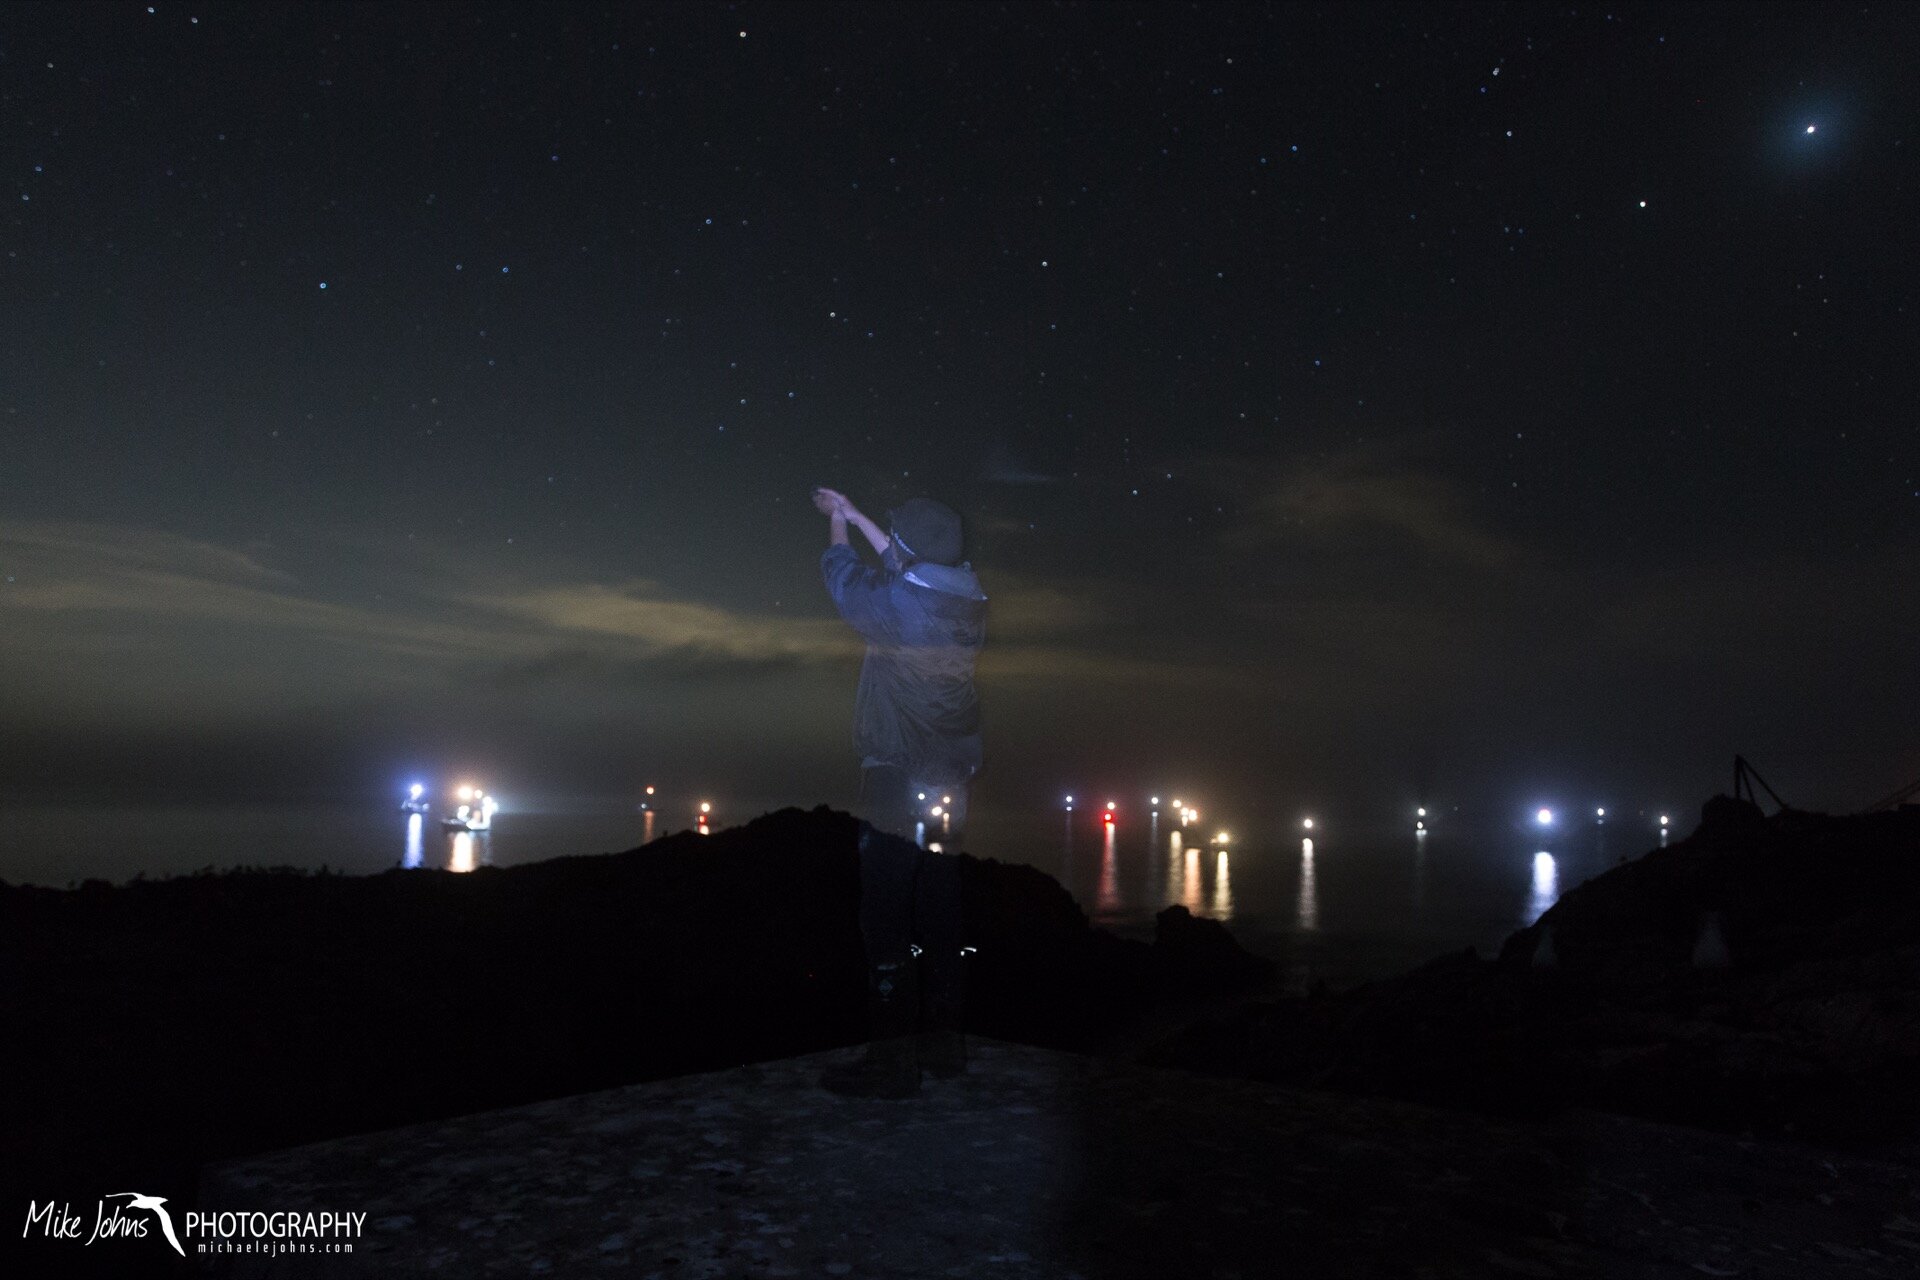  Releasing a banded storm-petrel with the lights of a sleeping fishing fleet taking shelter for the night.  